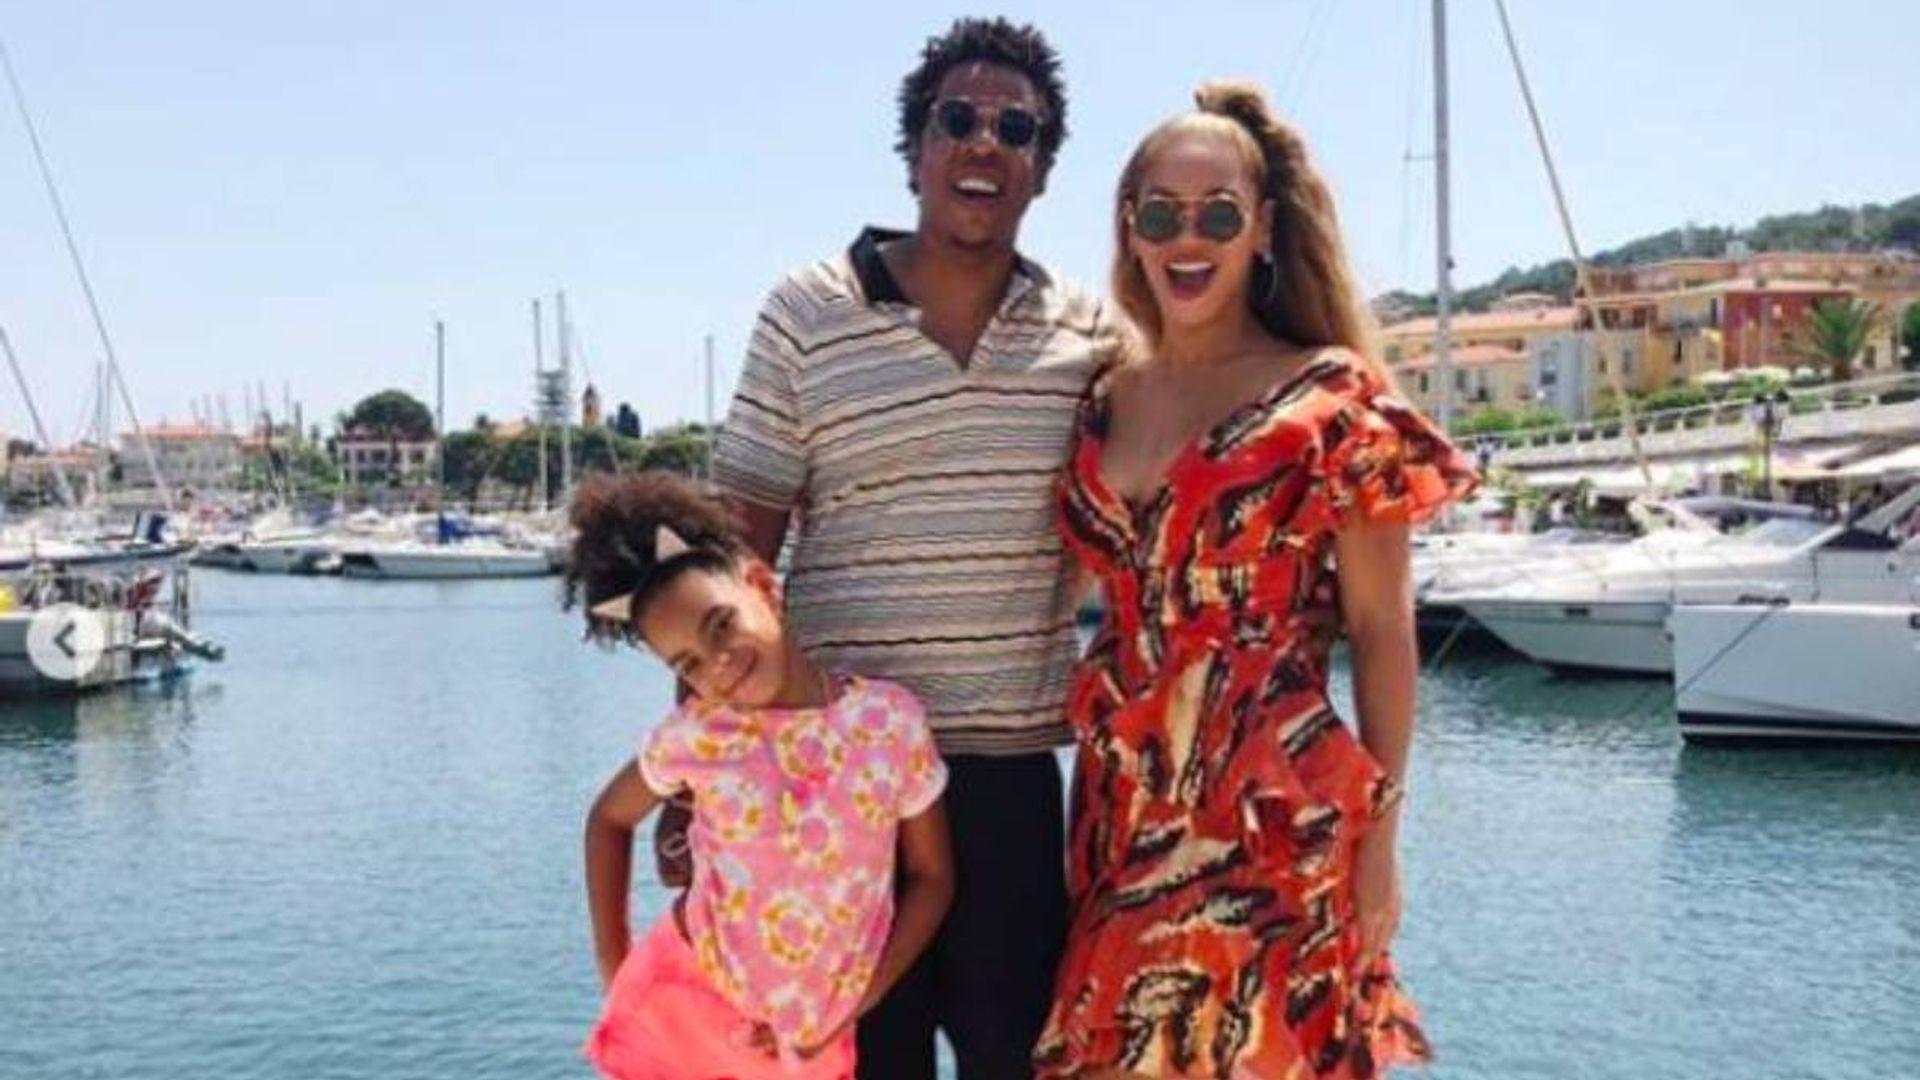 Beyoncé's daughter Blue Ivy makes incredibly rare appearance with famous family